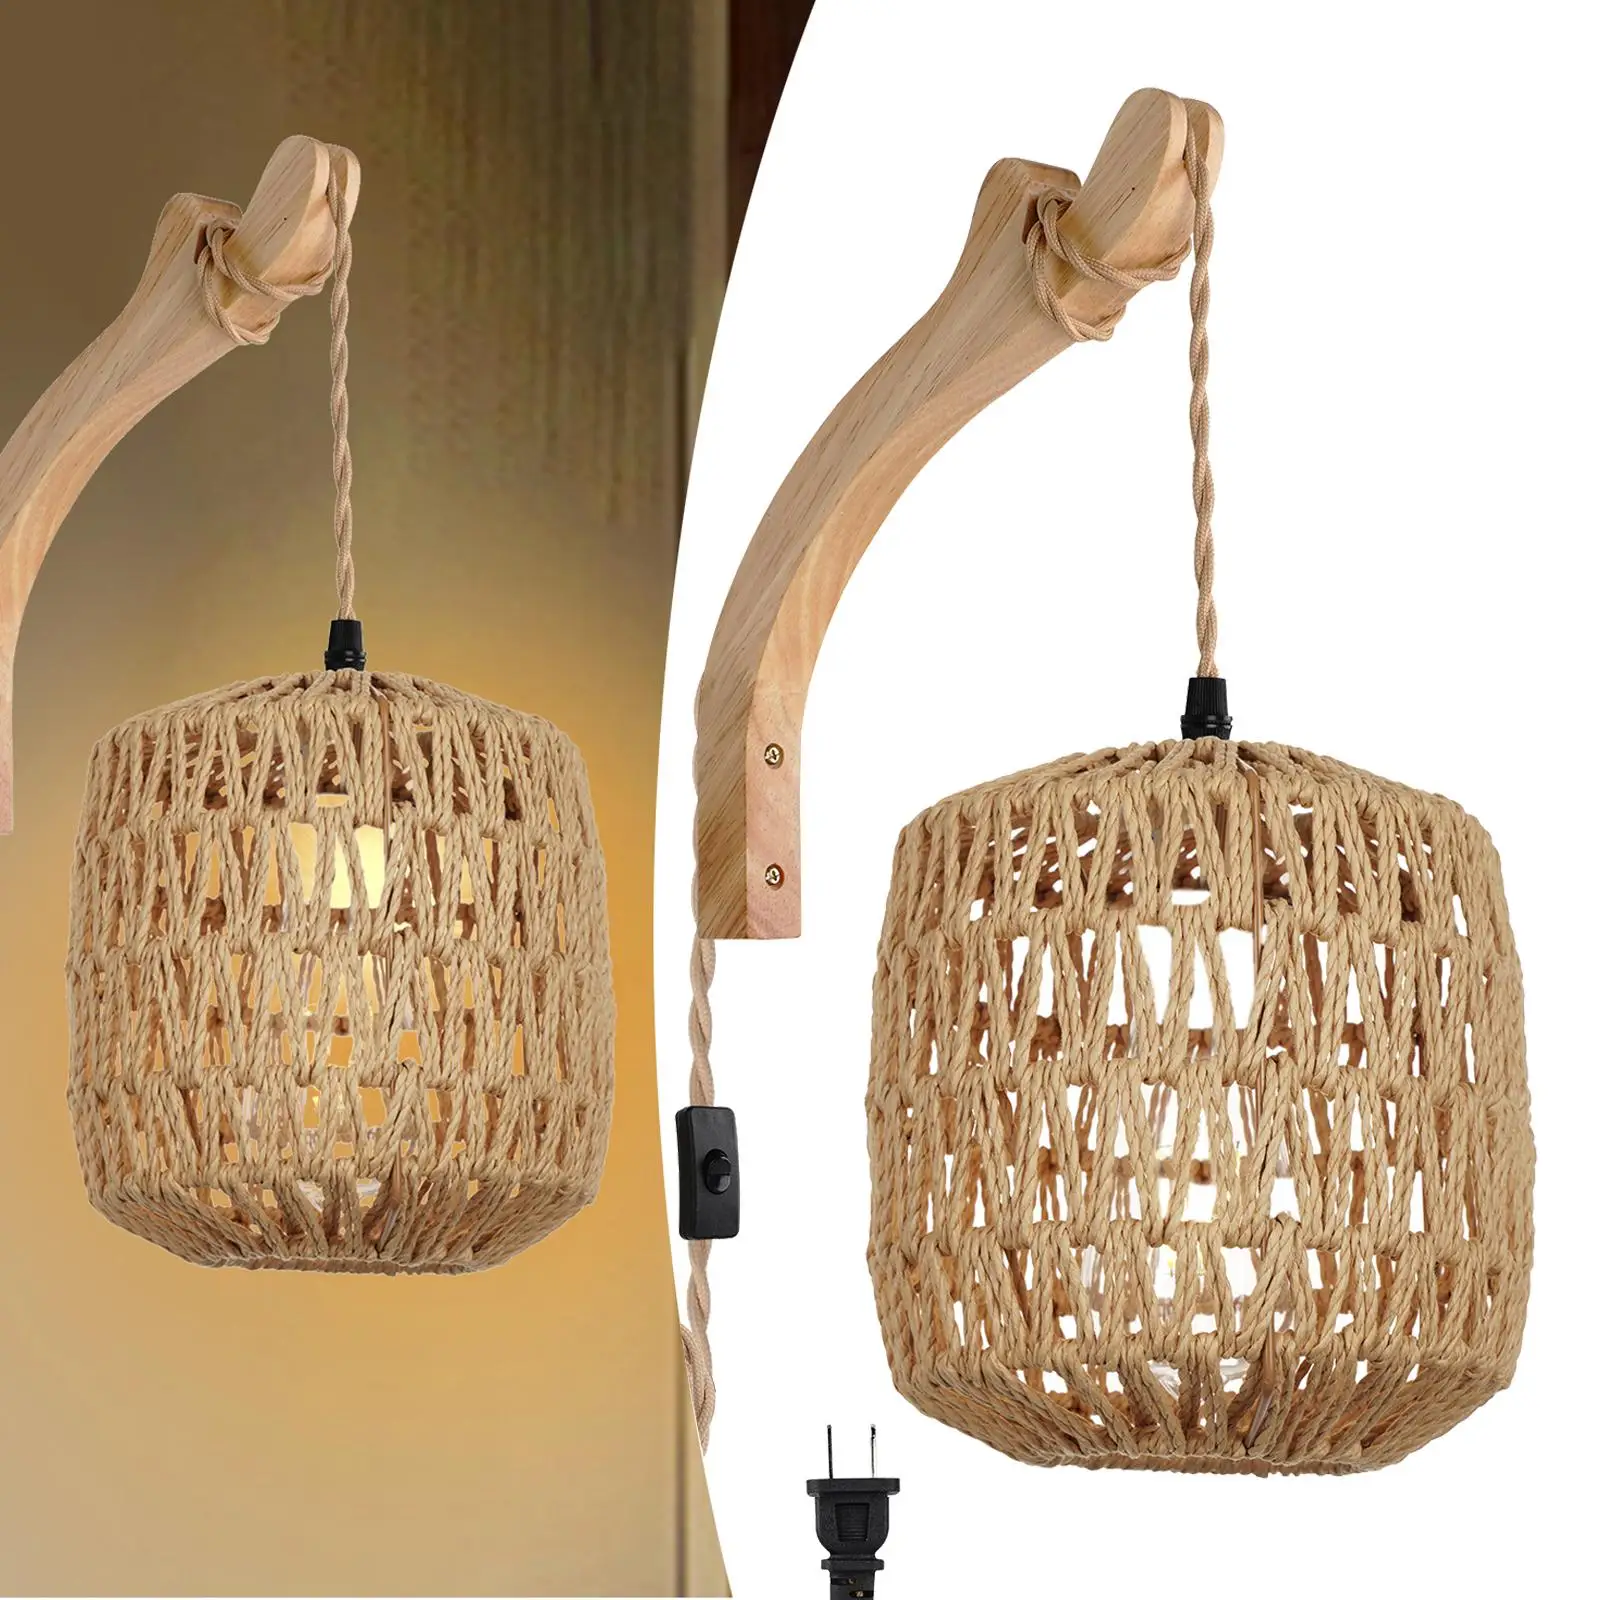 Wall Lamp Farmhouse Wall Light with Wood Arm Handwoven Lamp Shade Wall Sconce for Living Room Home Office Kitchen Island Hallway